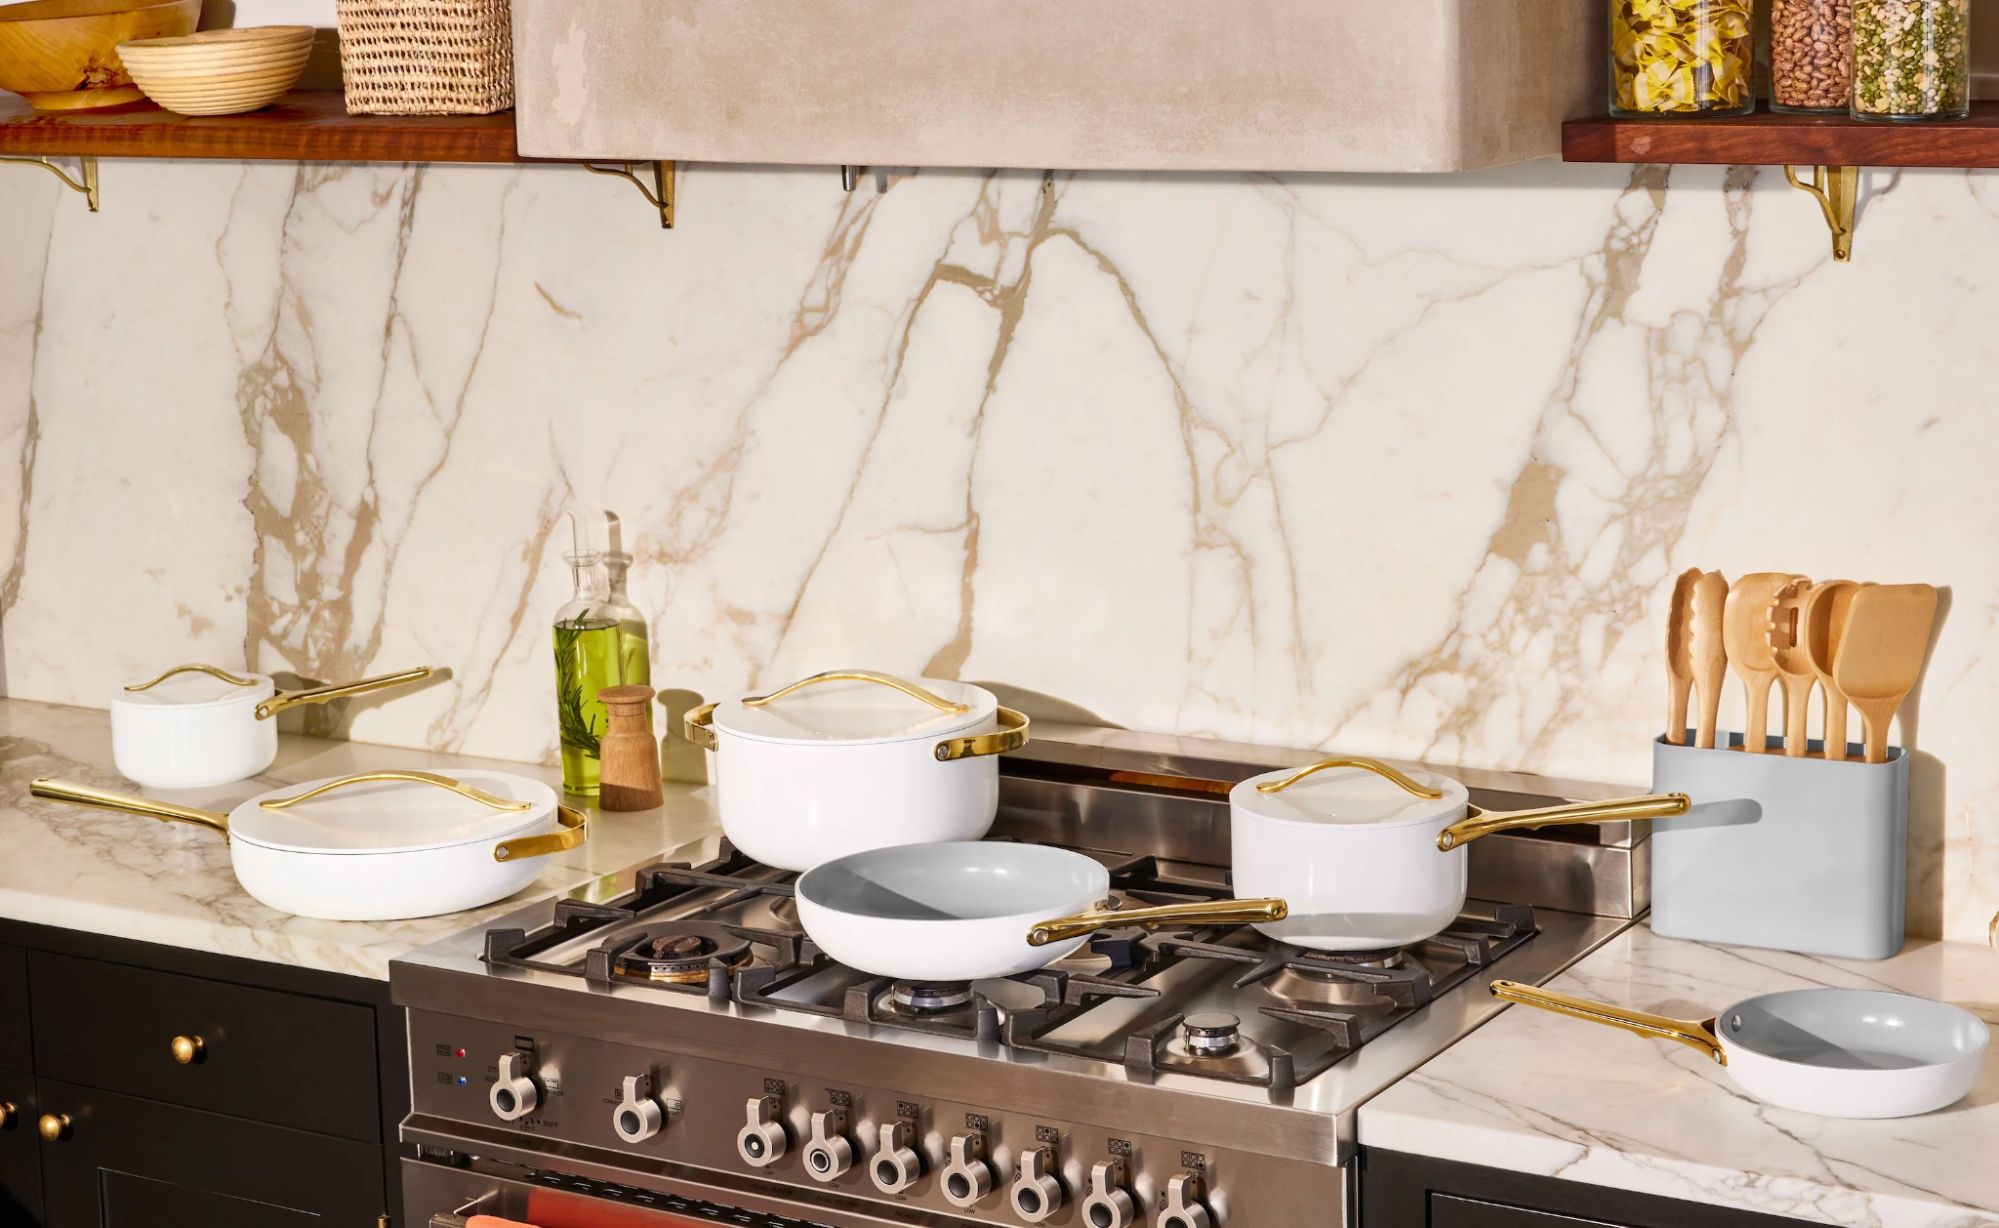 White and gray cookware on a stovetop in a modern kitchen with marble countertops.